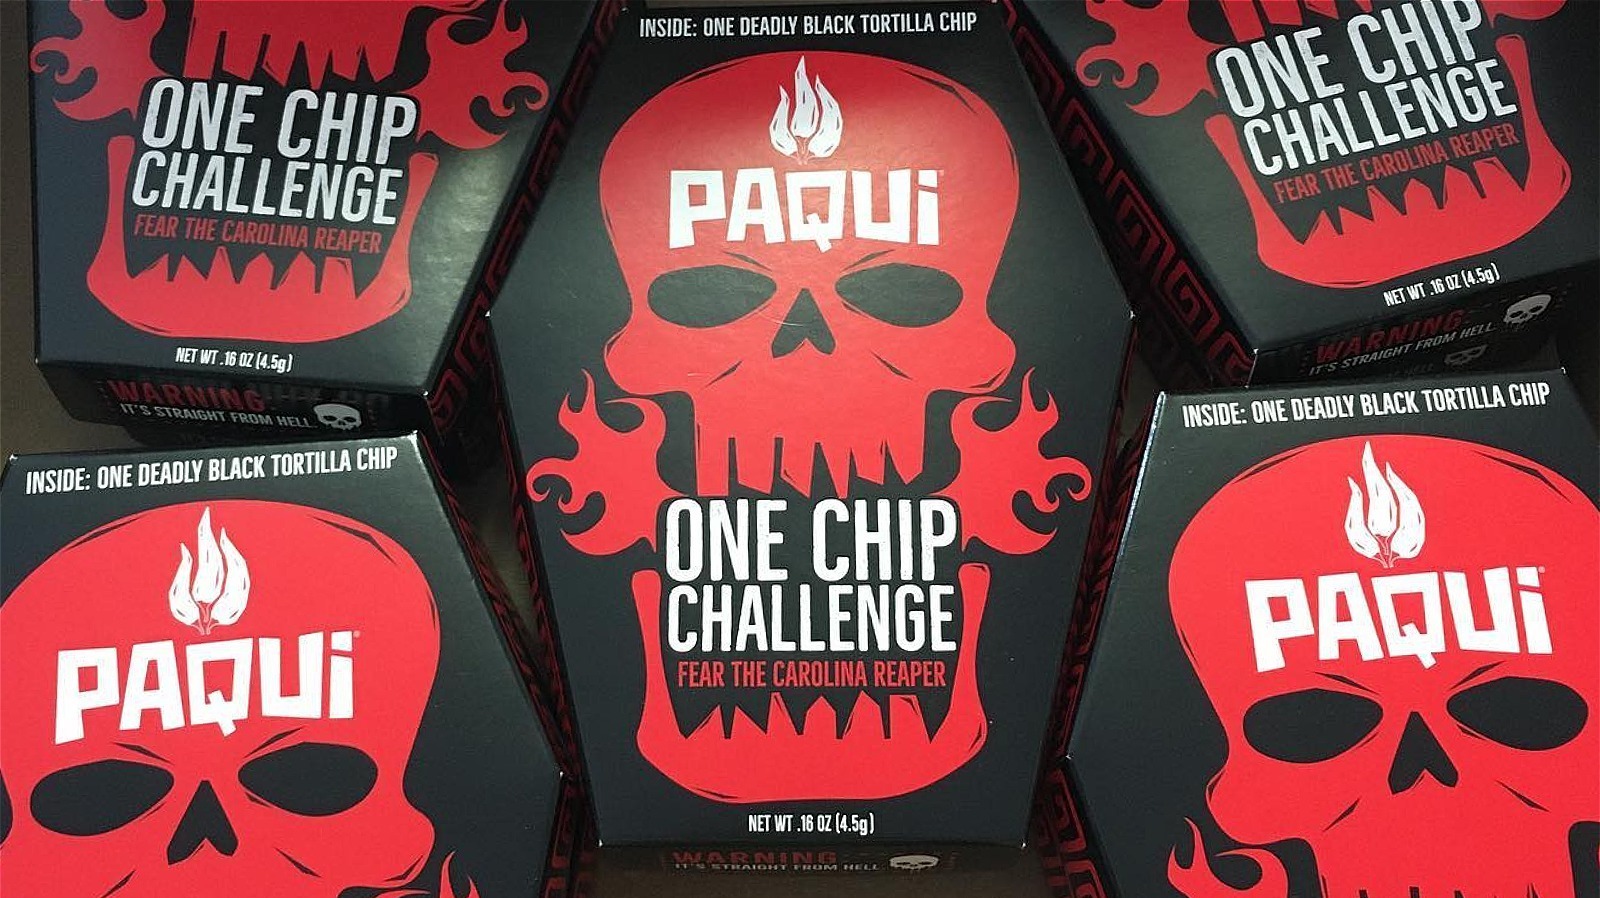 The Paqui One Chip Challenge: Where can you buy the One Chip?